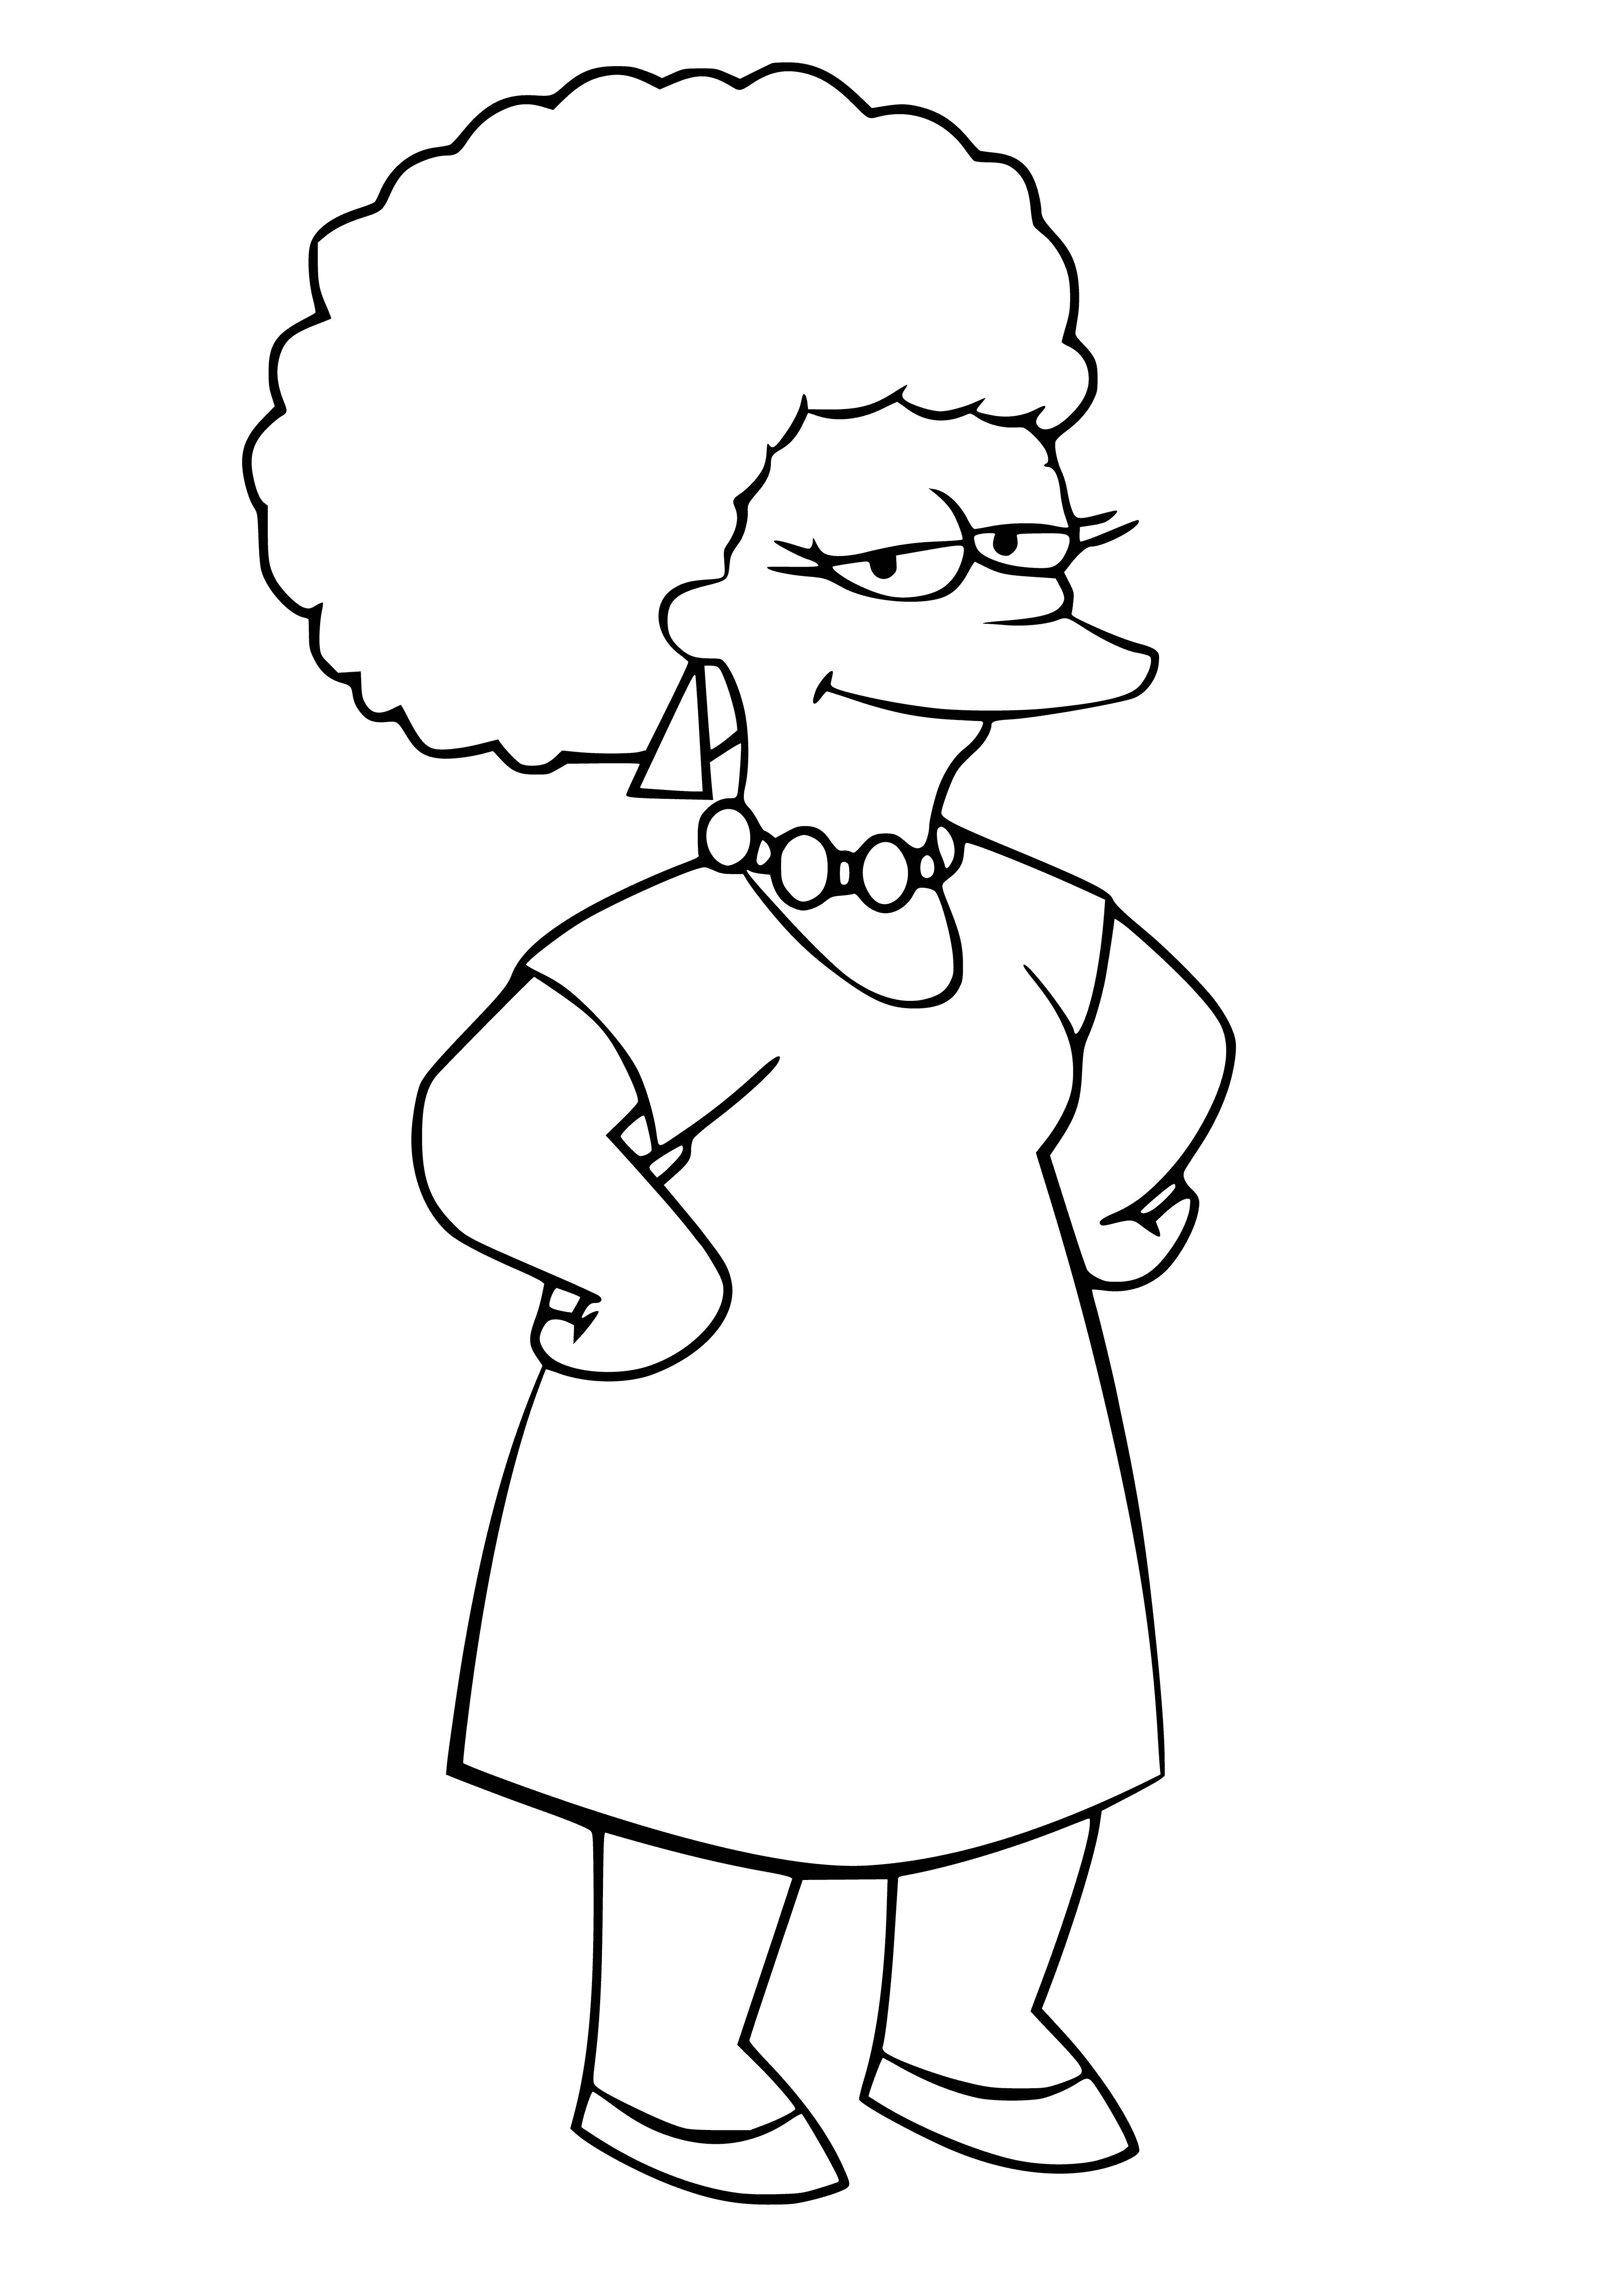 Patty Bouvier coloring page